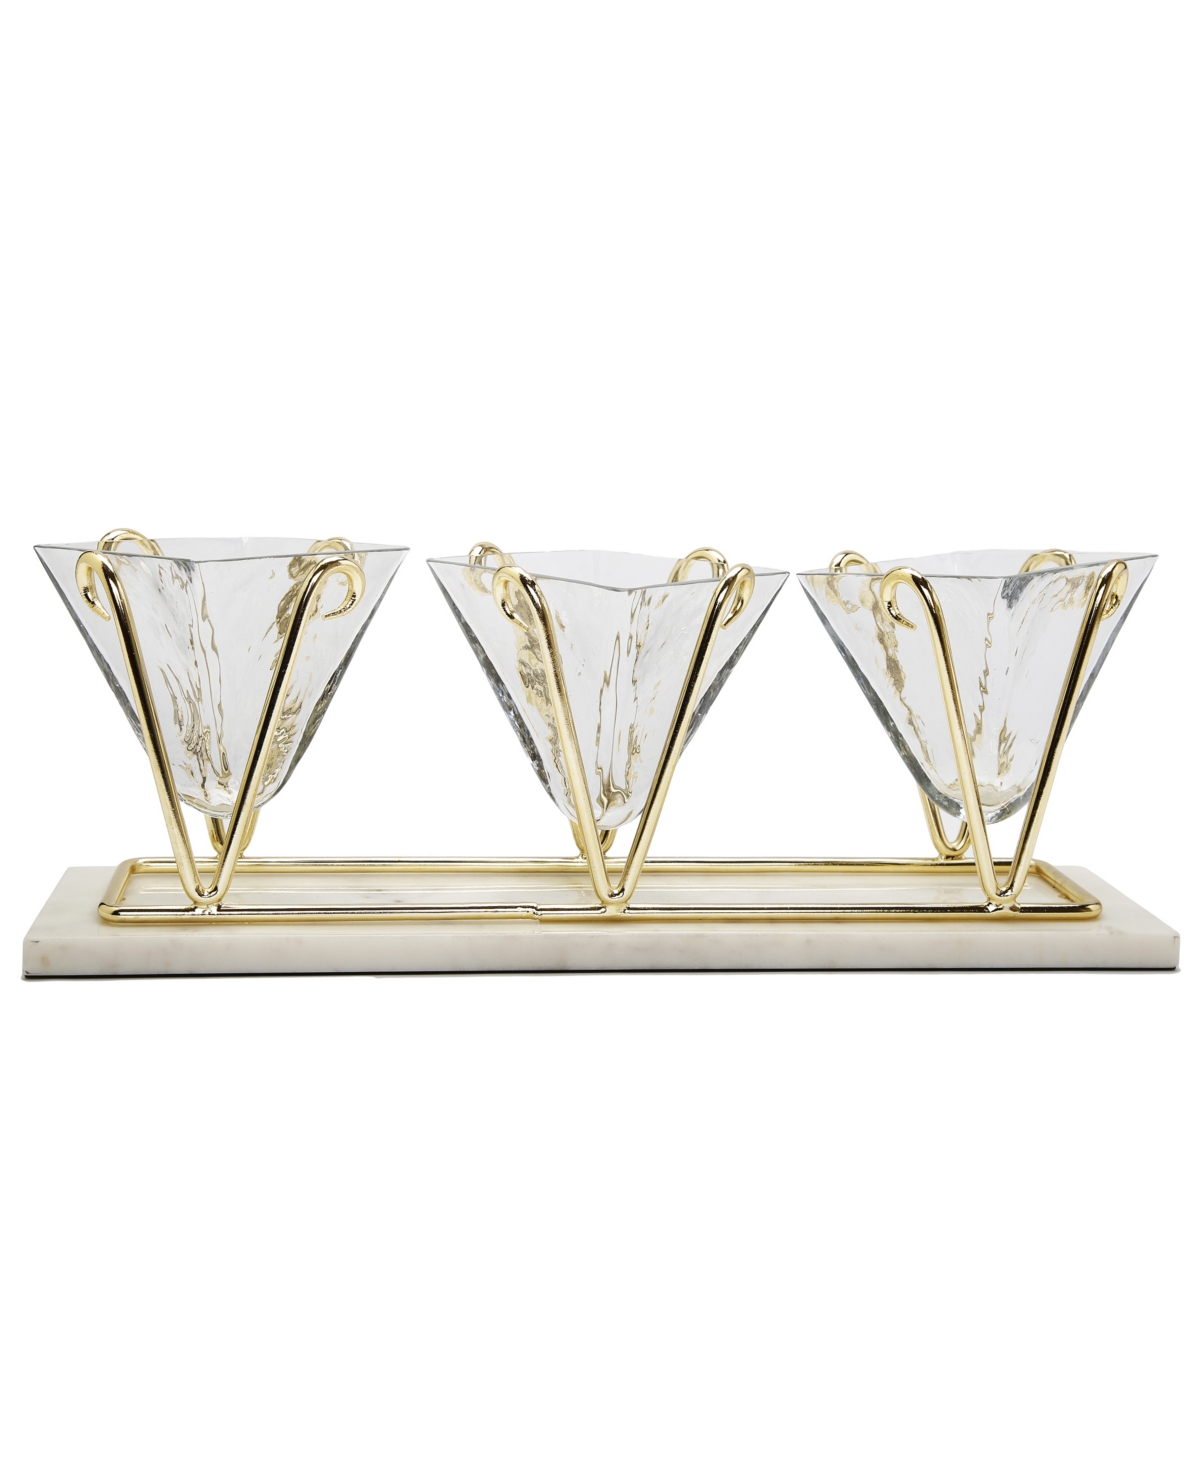 3 Sectional Glass Relish Dish with Brass and Marble Base - Gold-Tone